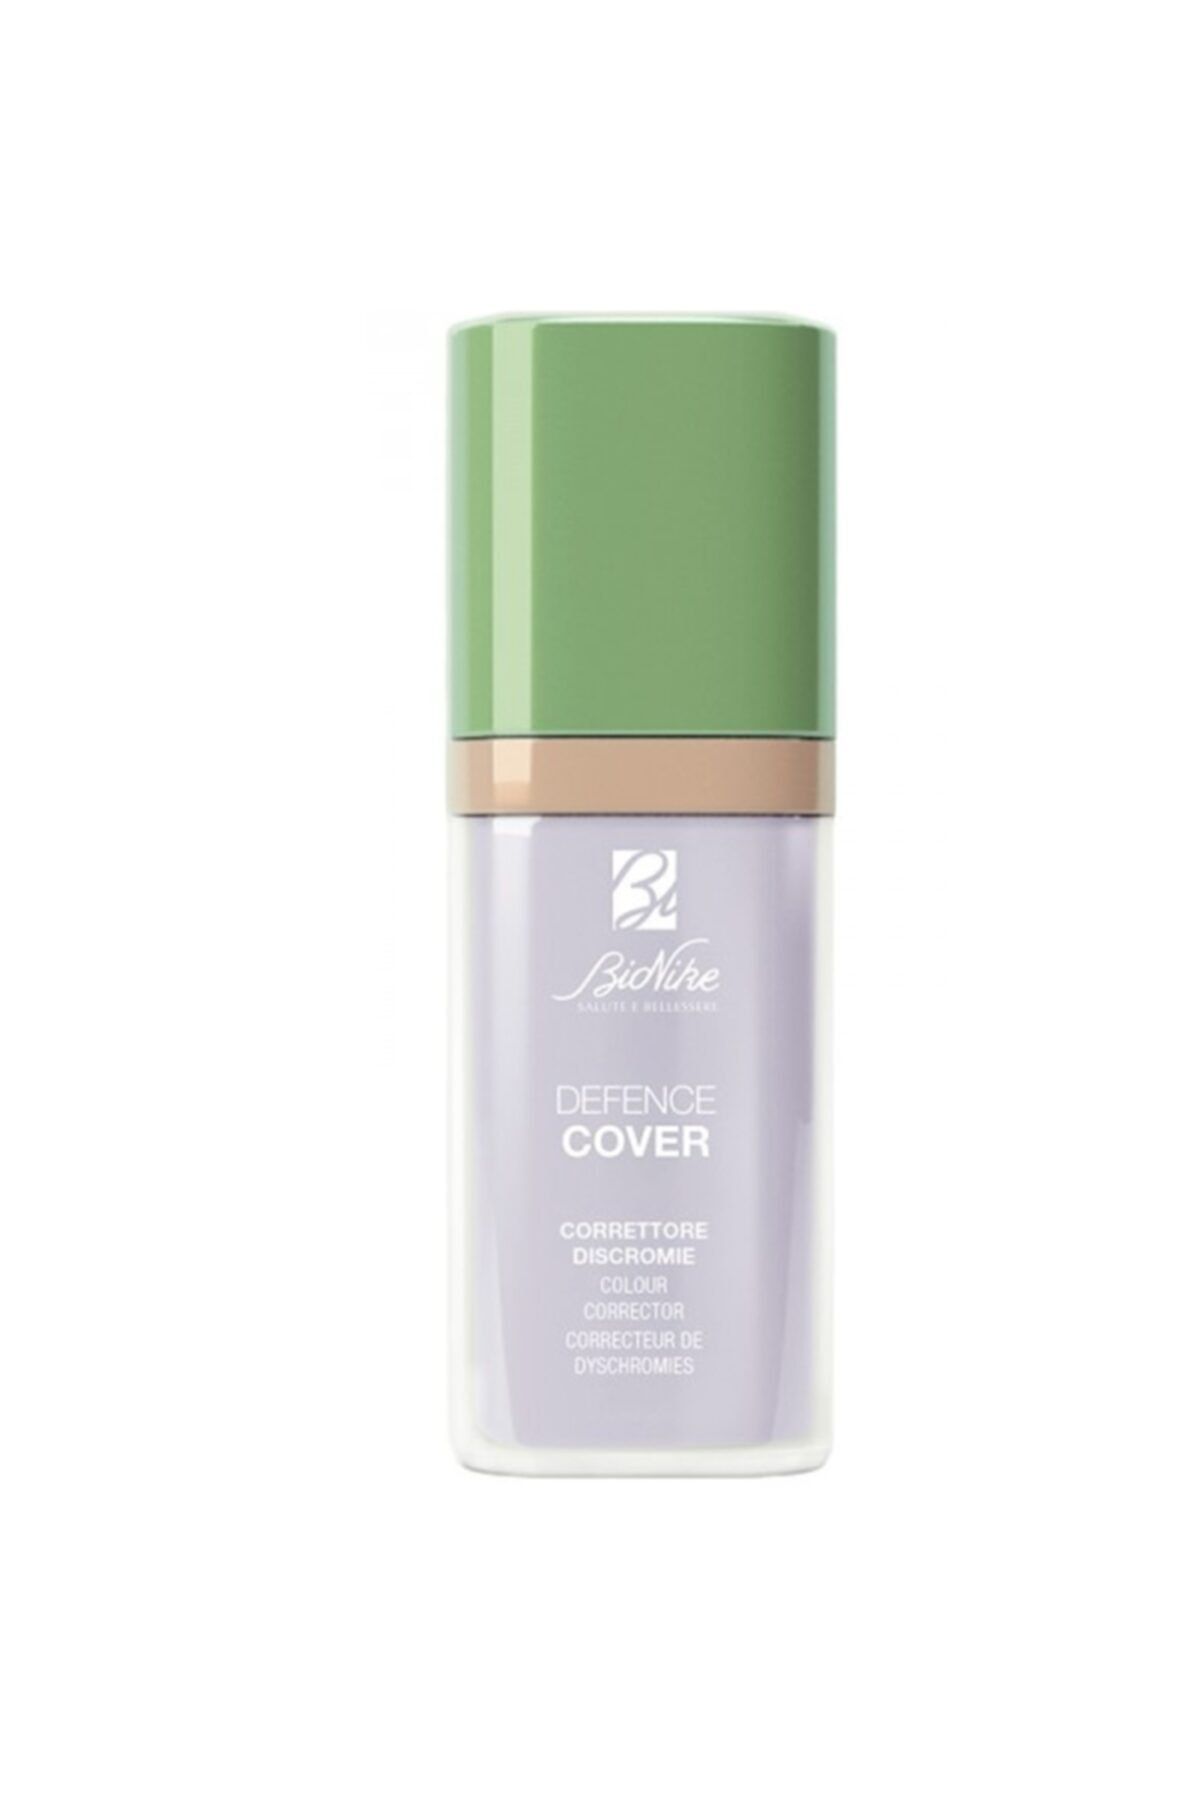 BioNike Defence Cover Colour Corrector Violet 12 ml